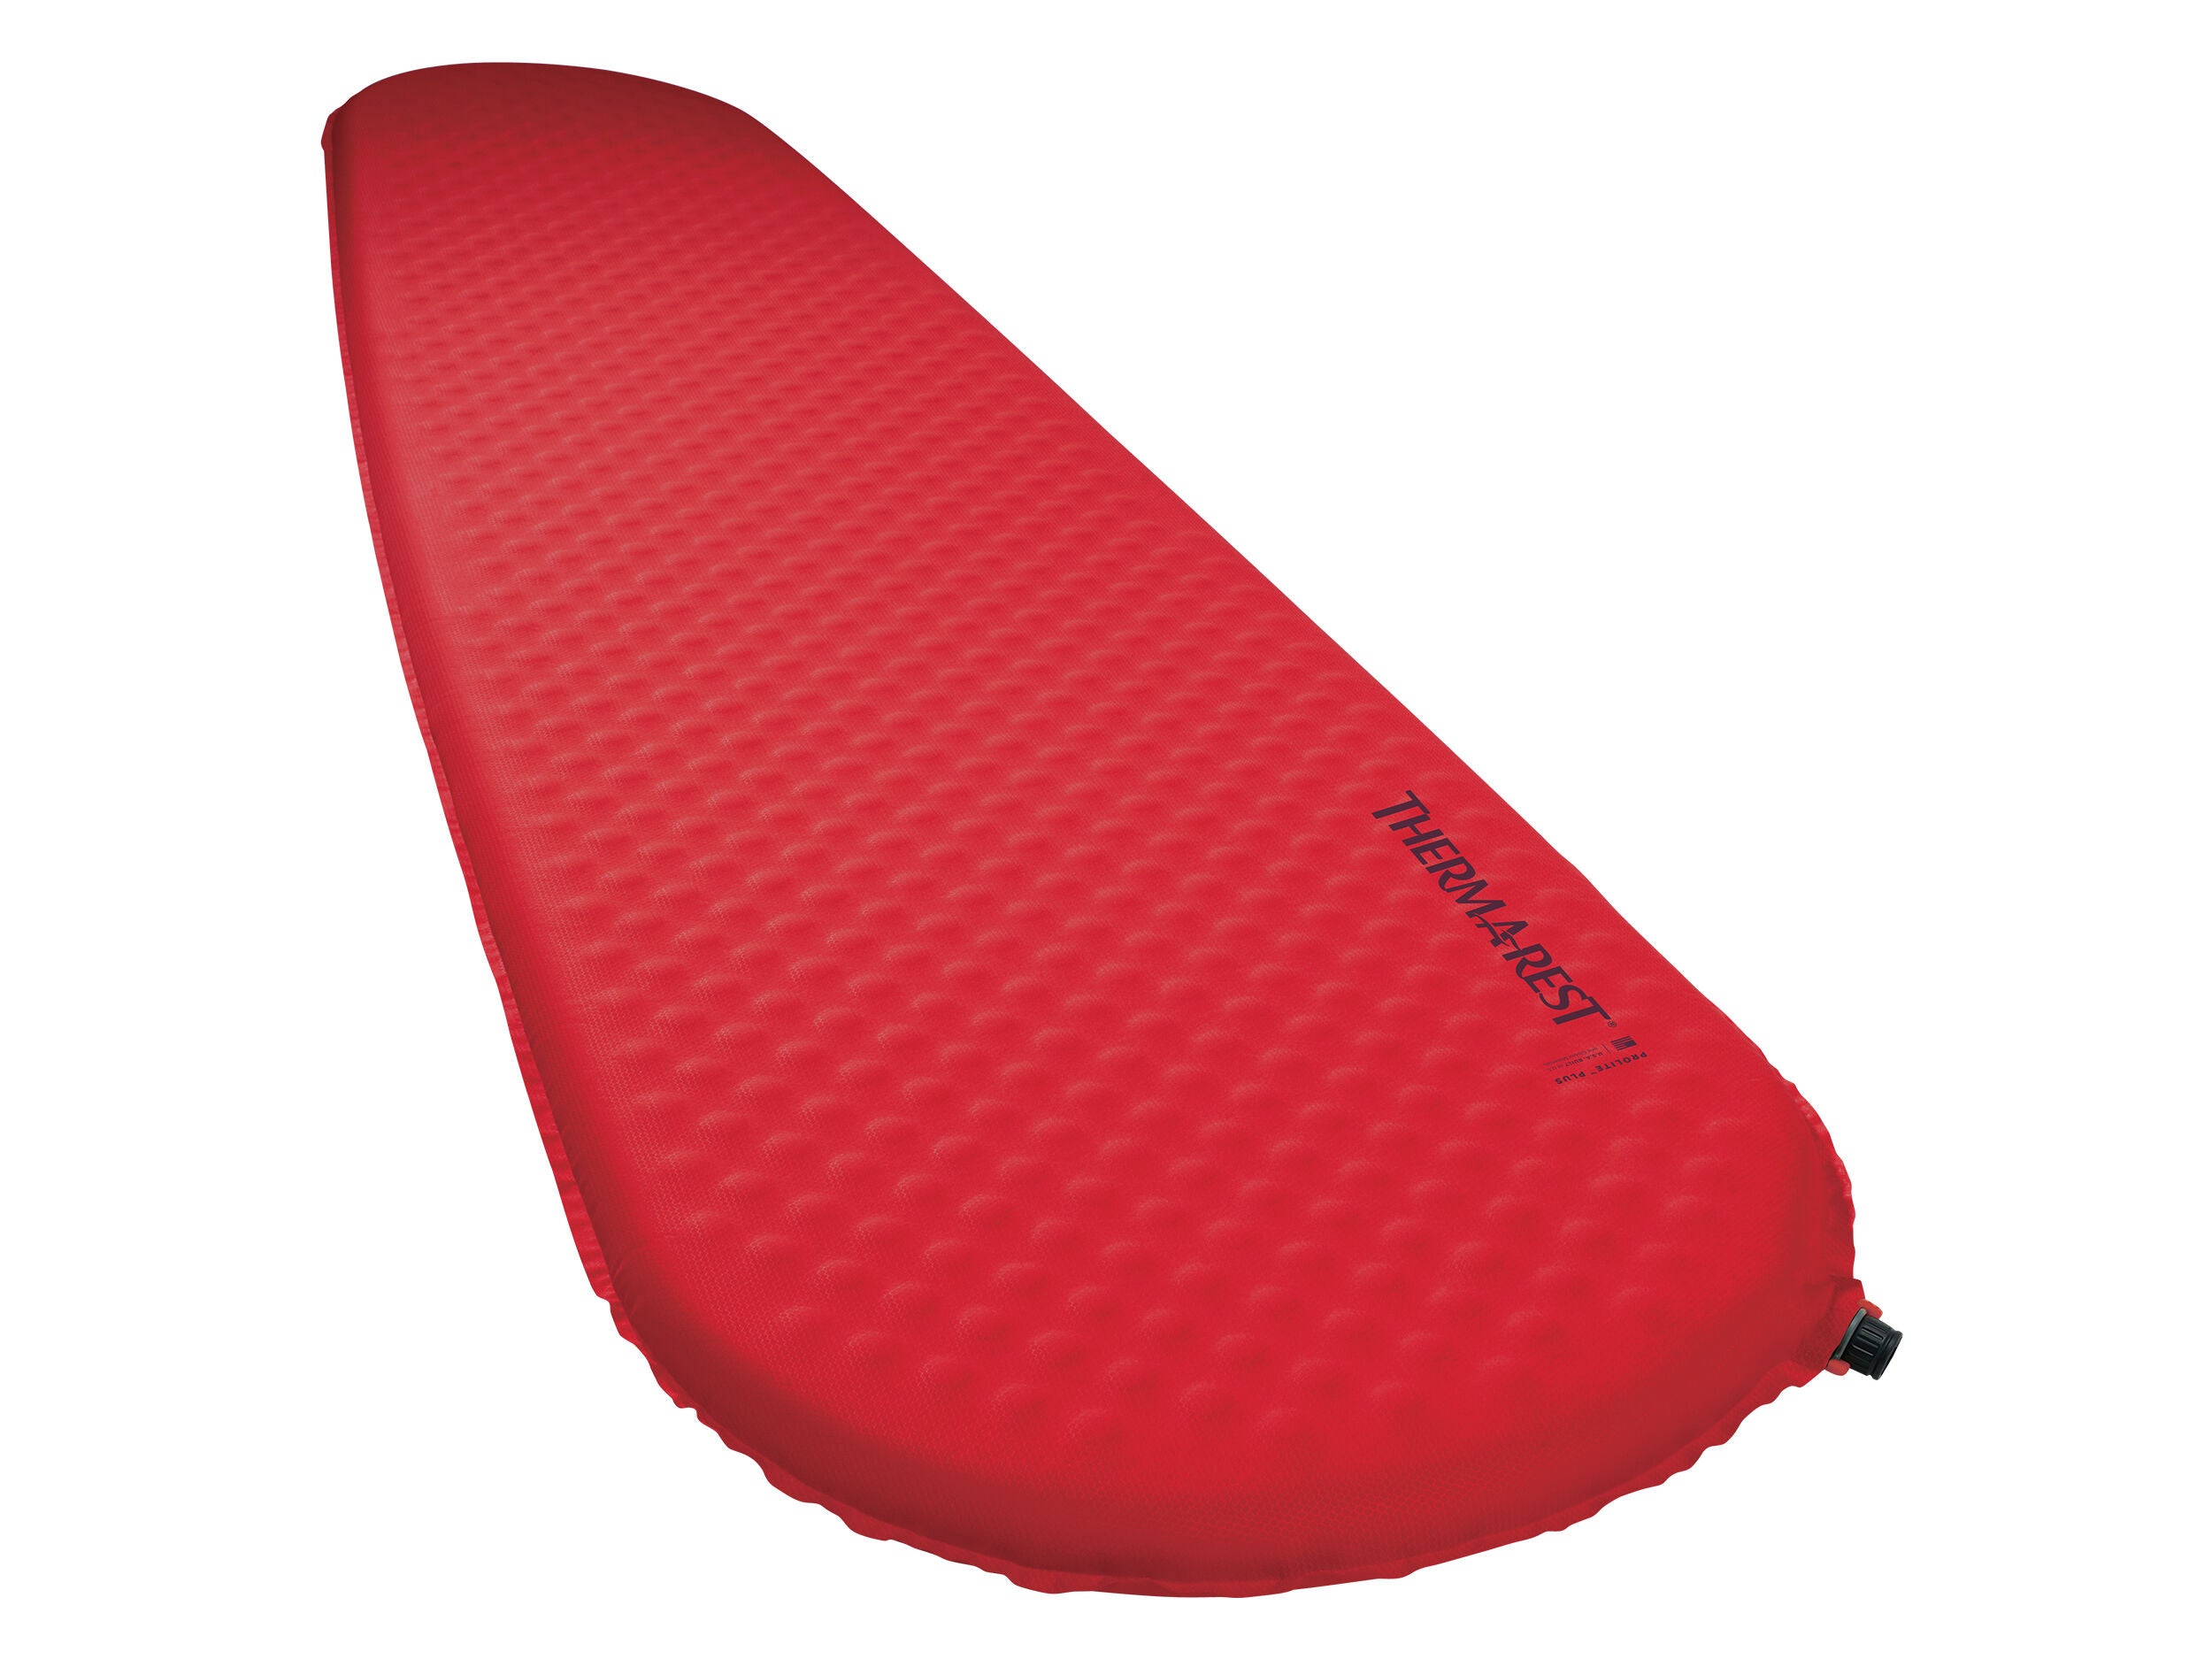 Therm-A-Rest Prolite Plus Sleeping Pad - Ascent Outdoors LLC